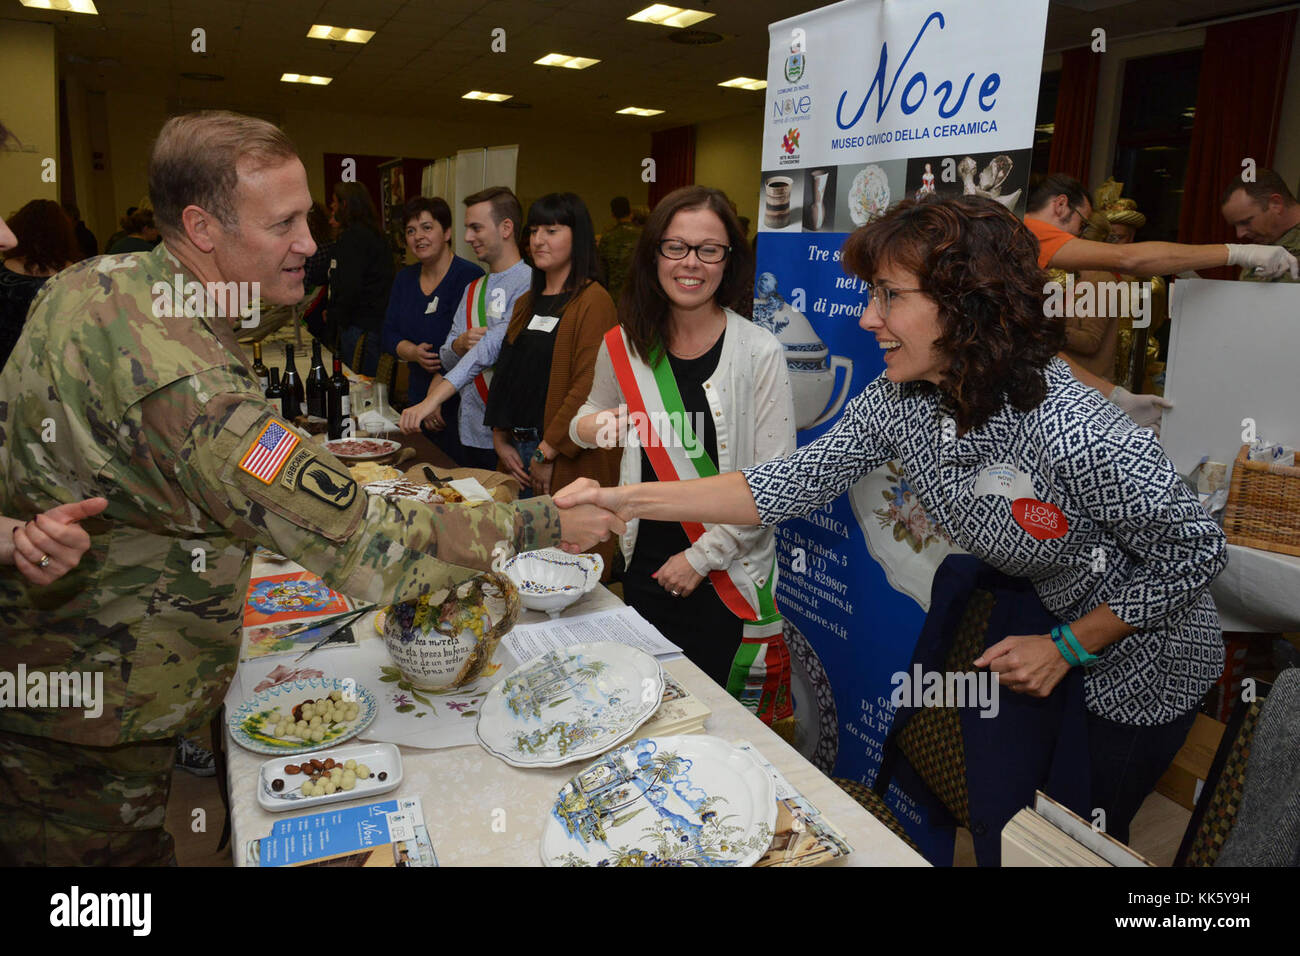 U.S. Col. Eric M. Berdy, U.S. Army Garrison Italy commander, thanks to Elisa Bittante, during the Meet the Mayors event at the Golden Lion Conference Center on Caserma Ederle, Vicenza, Italy, Nov. 8, 2017.   The event is an informal fair that hosts mayors, council members, and cultural and tourism representatives from Italian townships in the Vicenza and Padova provinces. (U.S. Army Photo by Paolo Bovo) Stock Photo